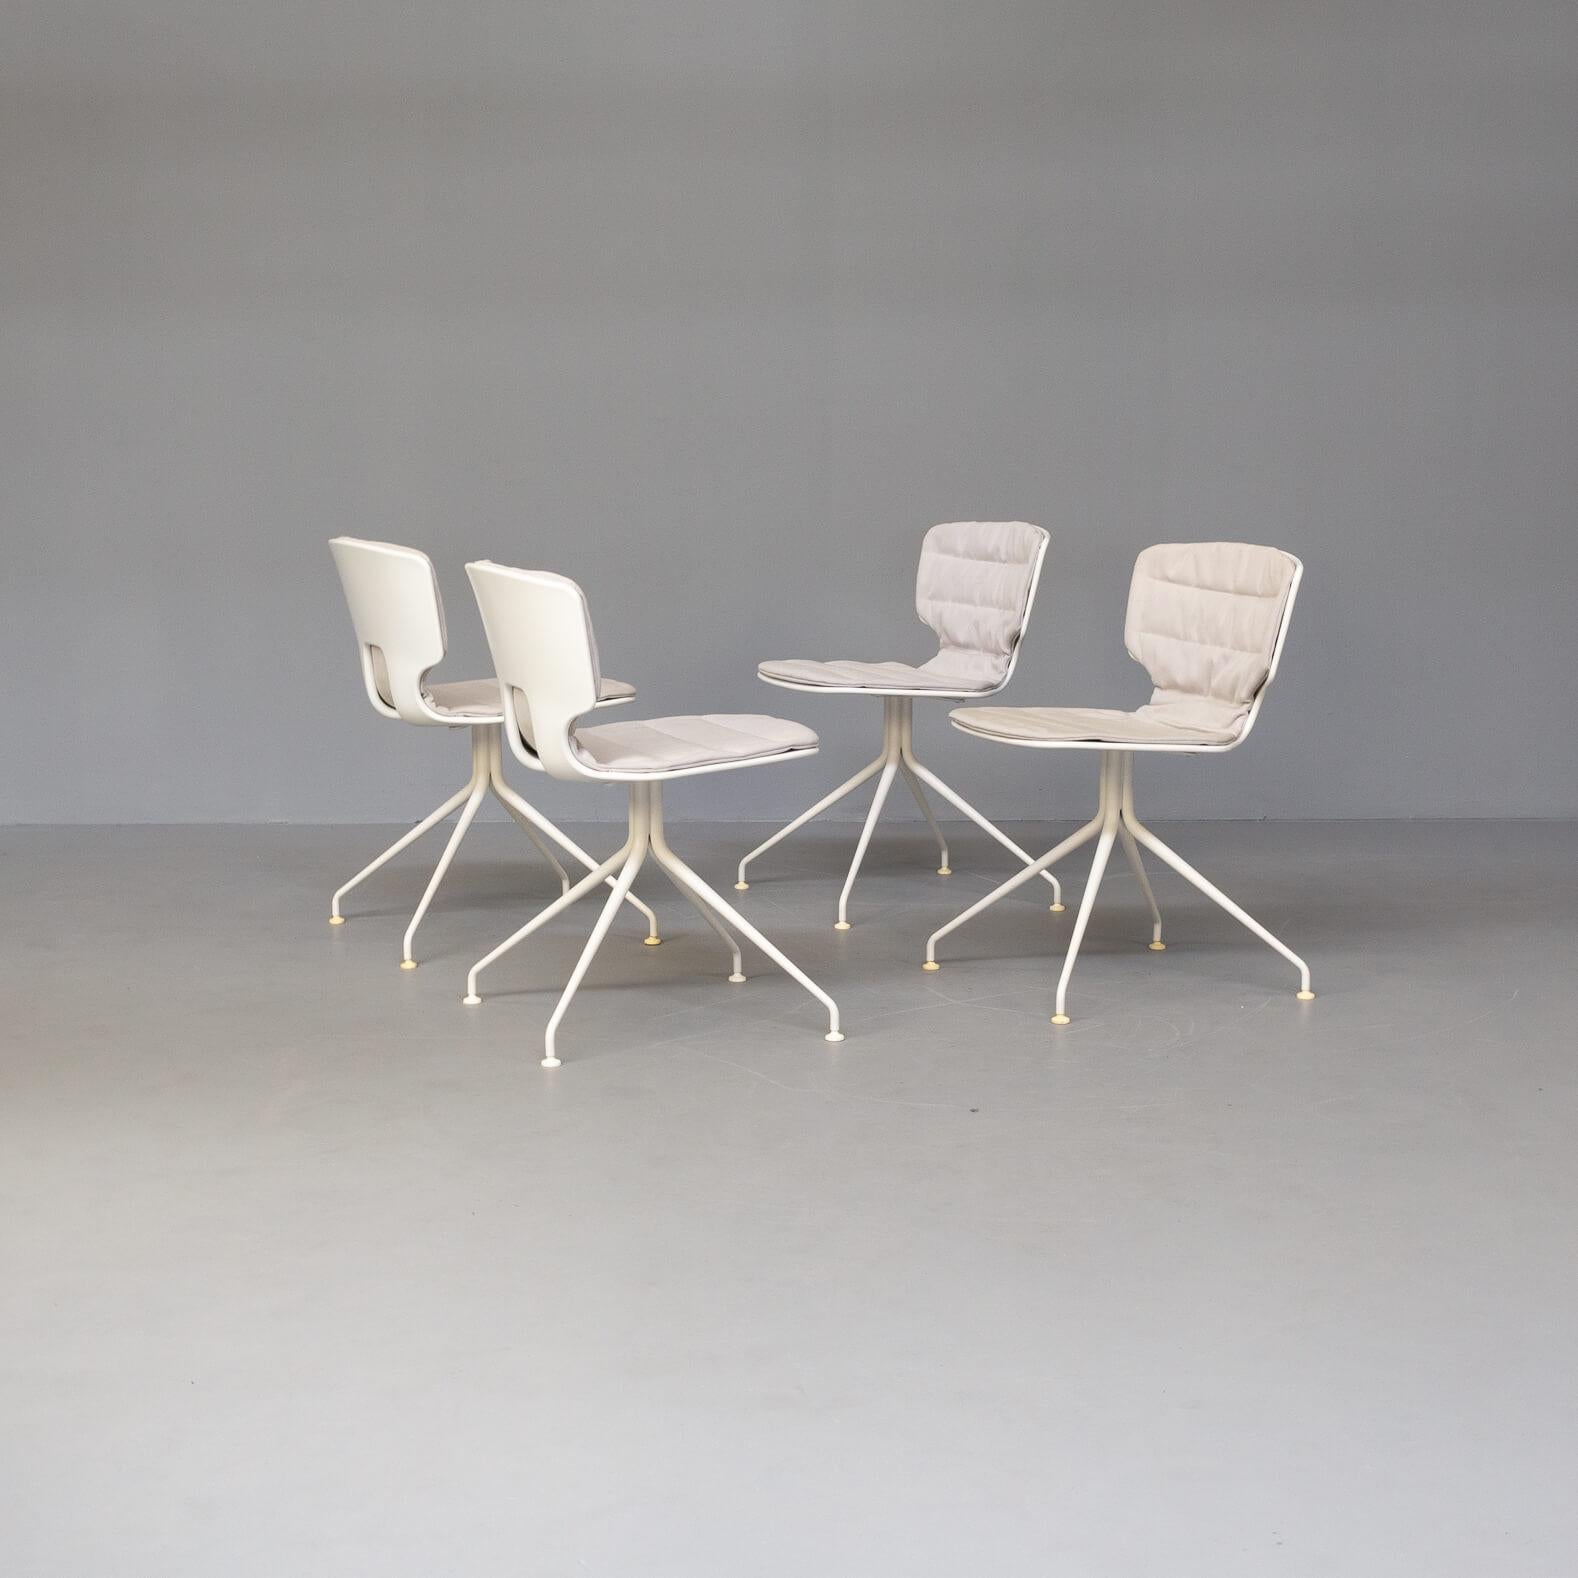 Modern Alberto Haberli ‘Erice’ Dining and Office Chair for Alias Set/4 For Sale